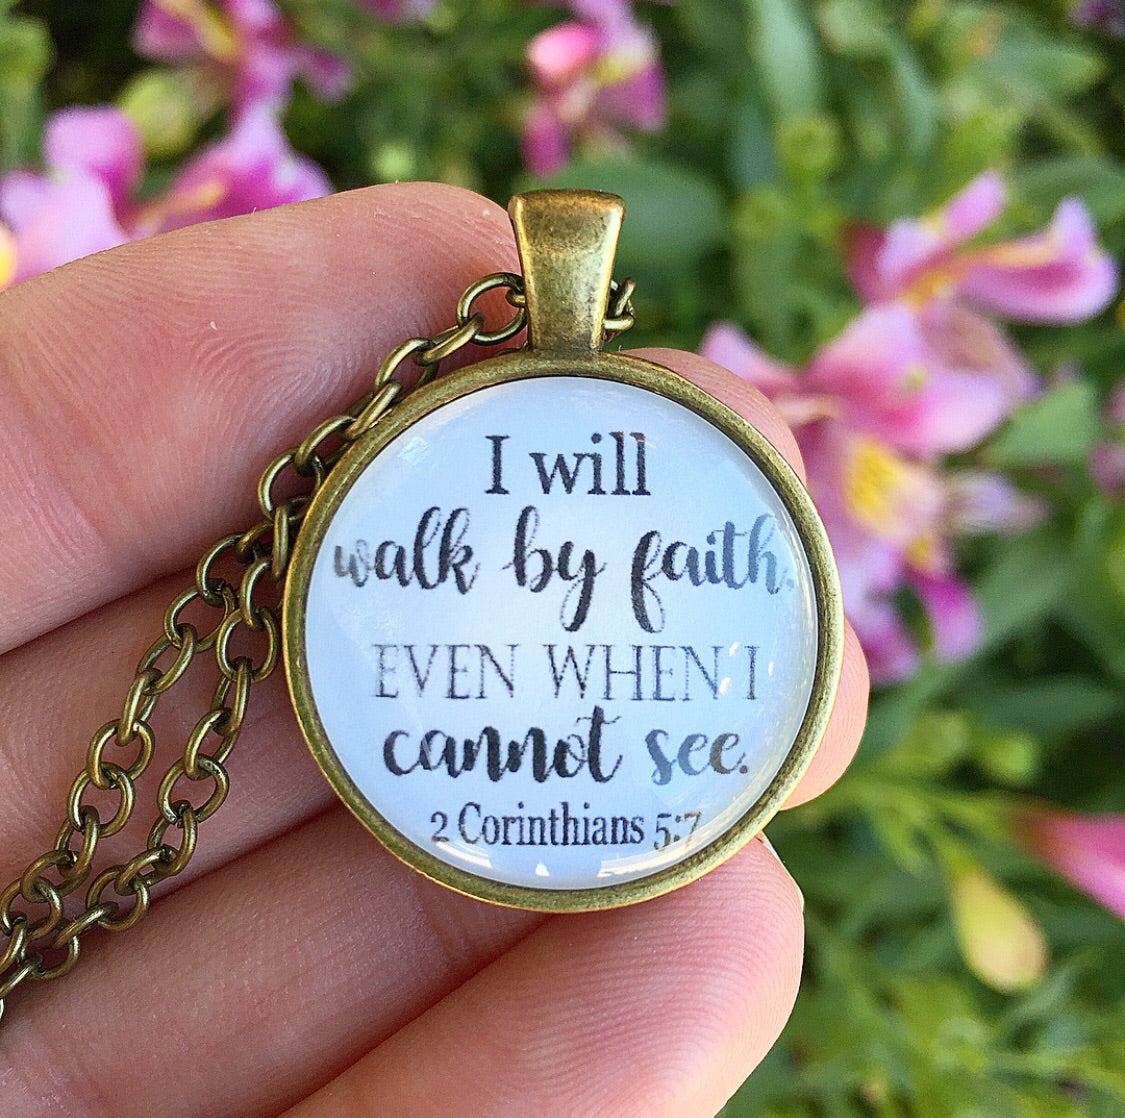 I will walk by faith even when I cannot see 2 Corinthians 5:7 Necklace - Redeemed Jewelry